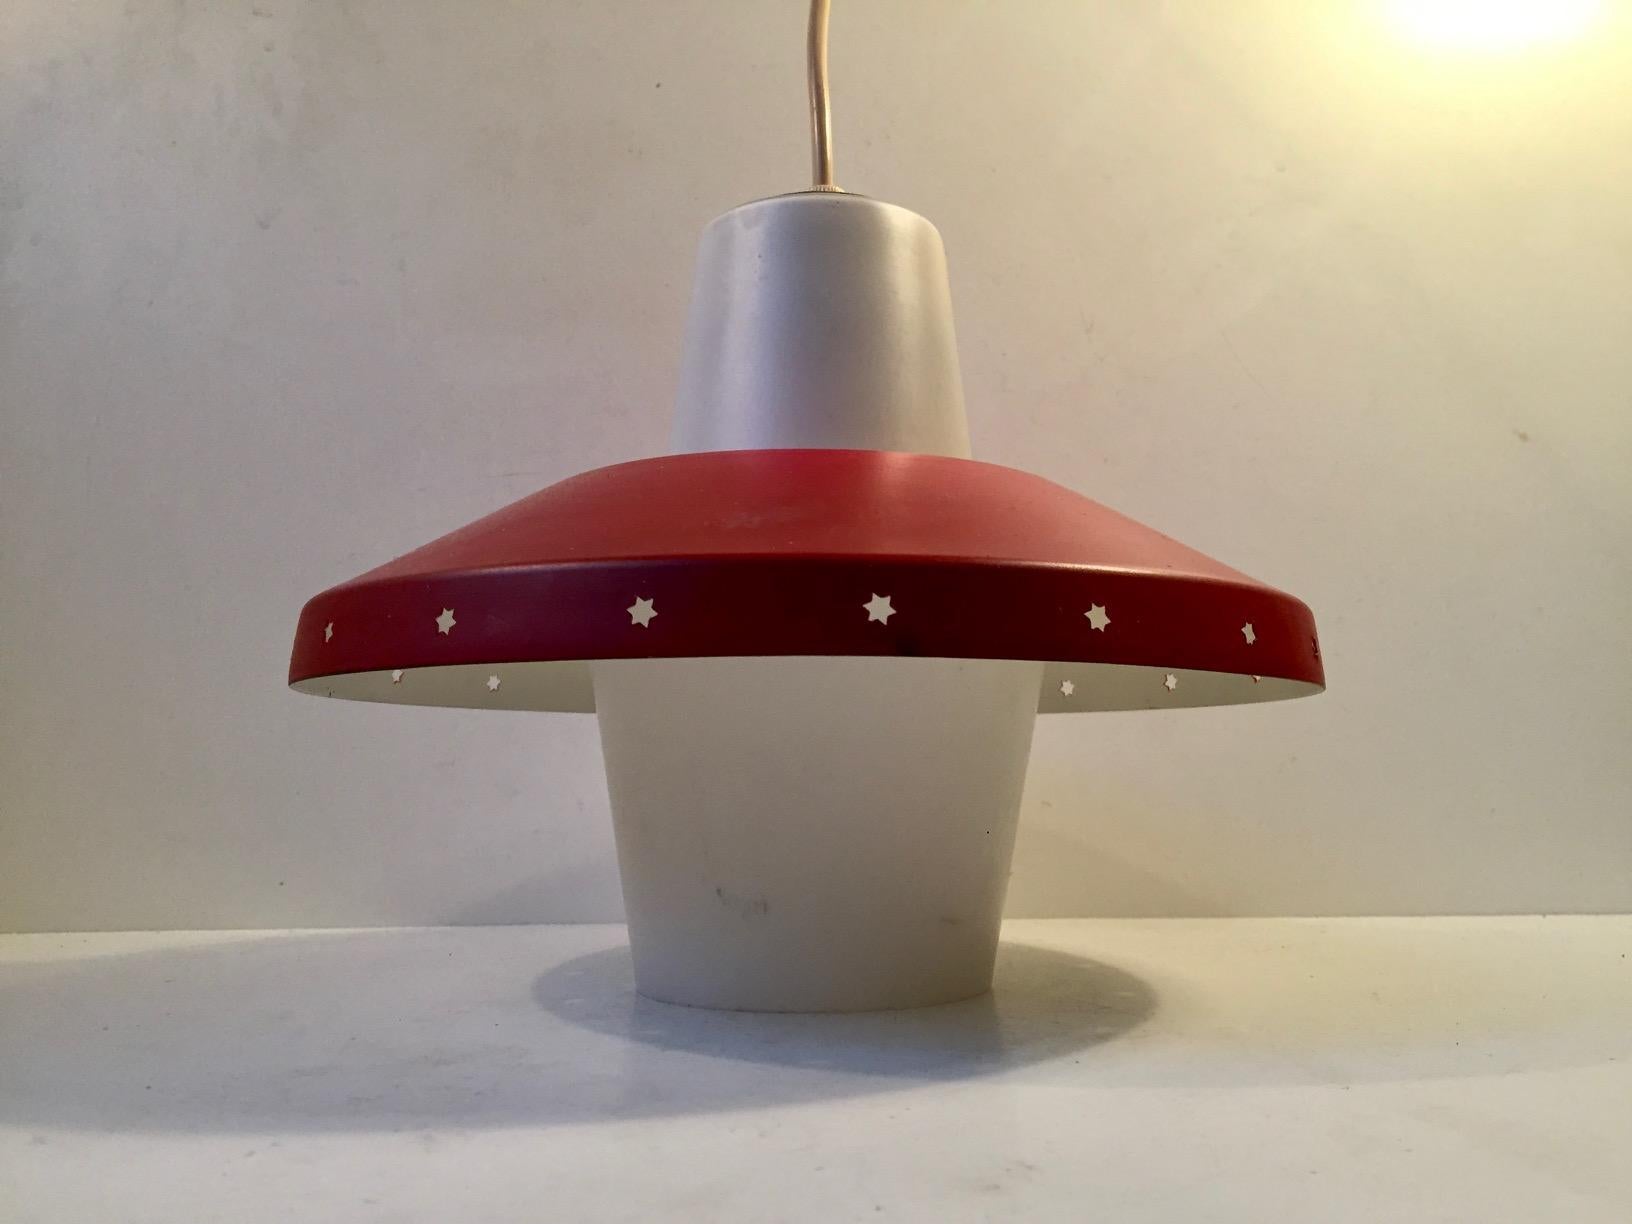 Danish ceiling light designed by Bent Karlby for Lyfa, Denmark and manufactured in the late 1950s. This design is often falsely attributed to Svend Aage Holm Sørensen. The light consists of red lacquered shade with perforated Stars to the edge and a